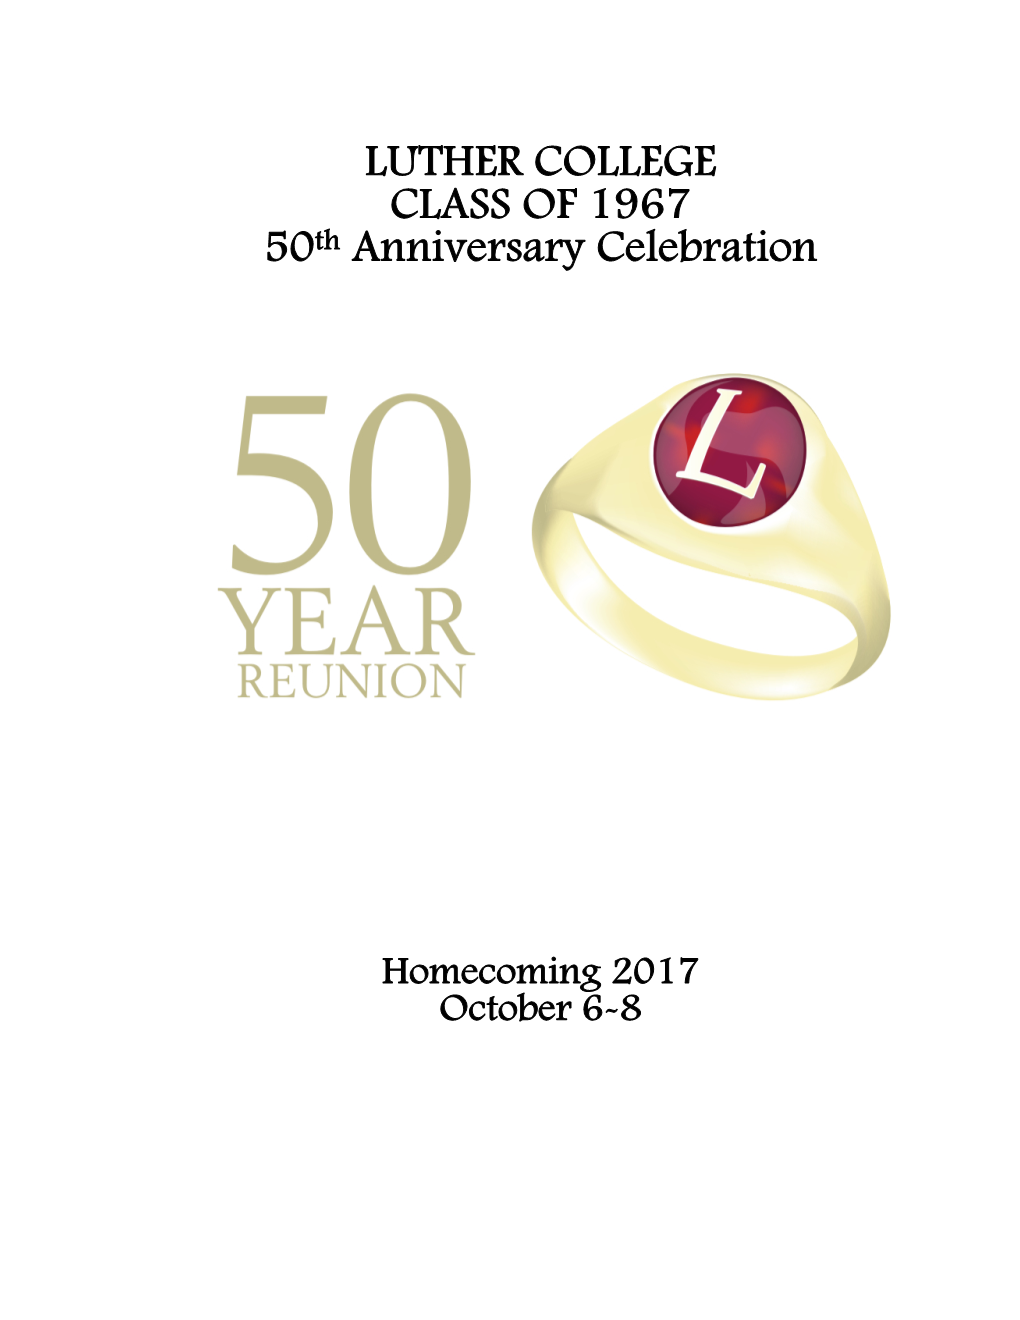 LUTHER COLLEGE CLASS of 1967 50Th Anniversary Celebration